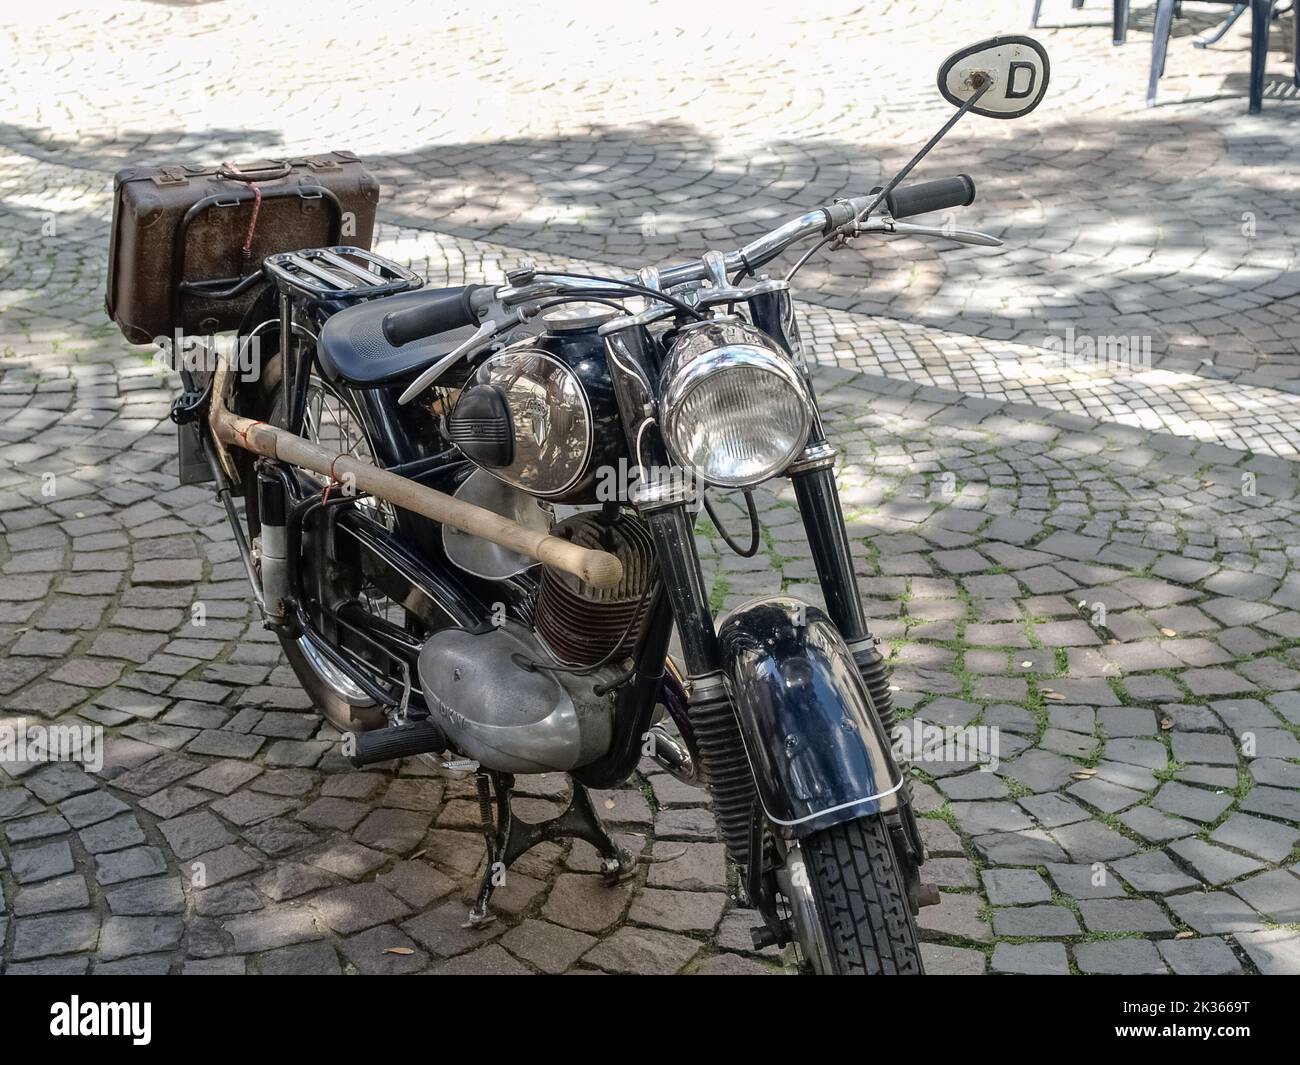 Auto Union DKW (Dampf-Kraft-Wagen) RT motorcycle oldtimer with leather suitcase and shovel standing in the old town of Linz am Rhein, Germany Stock Photo